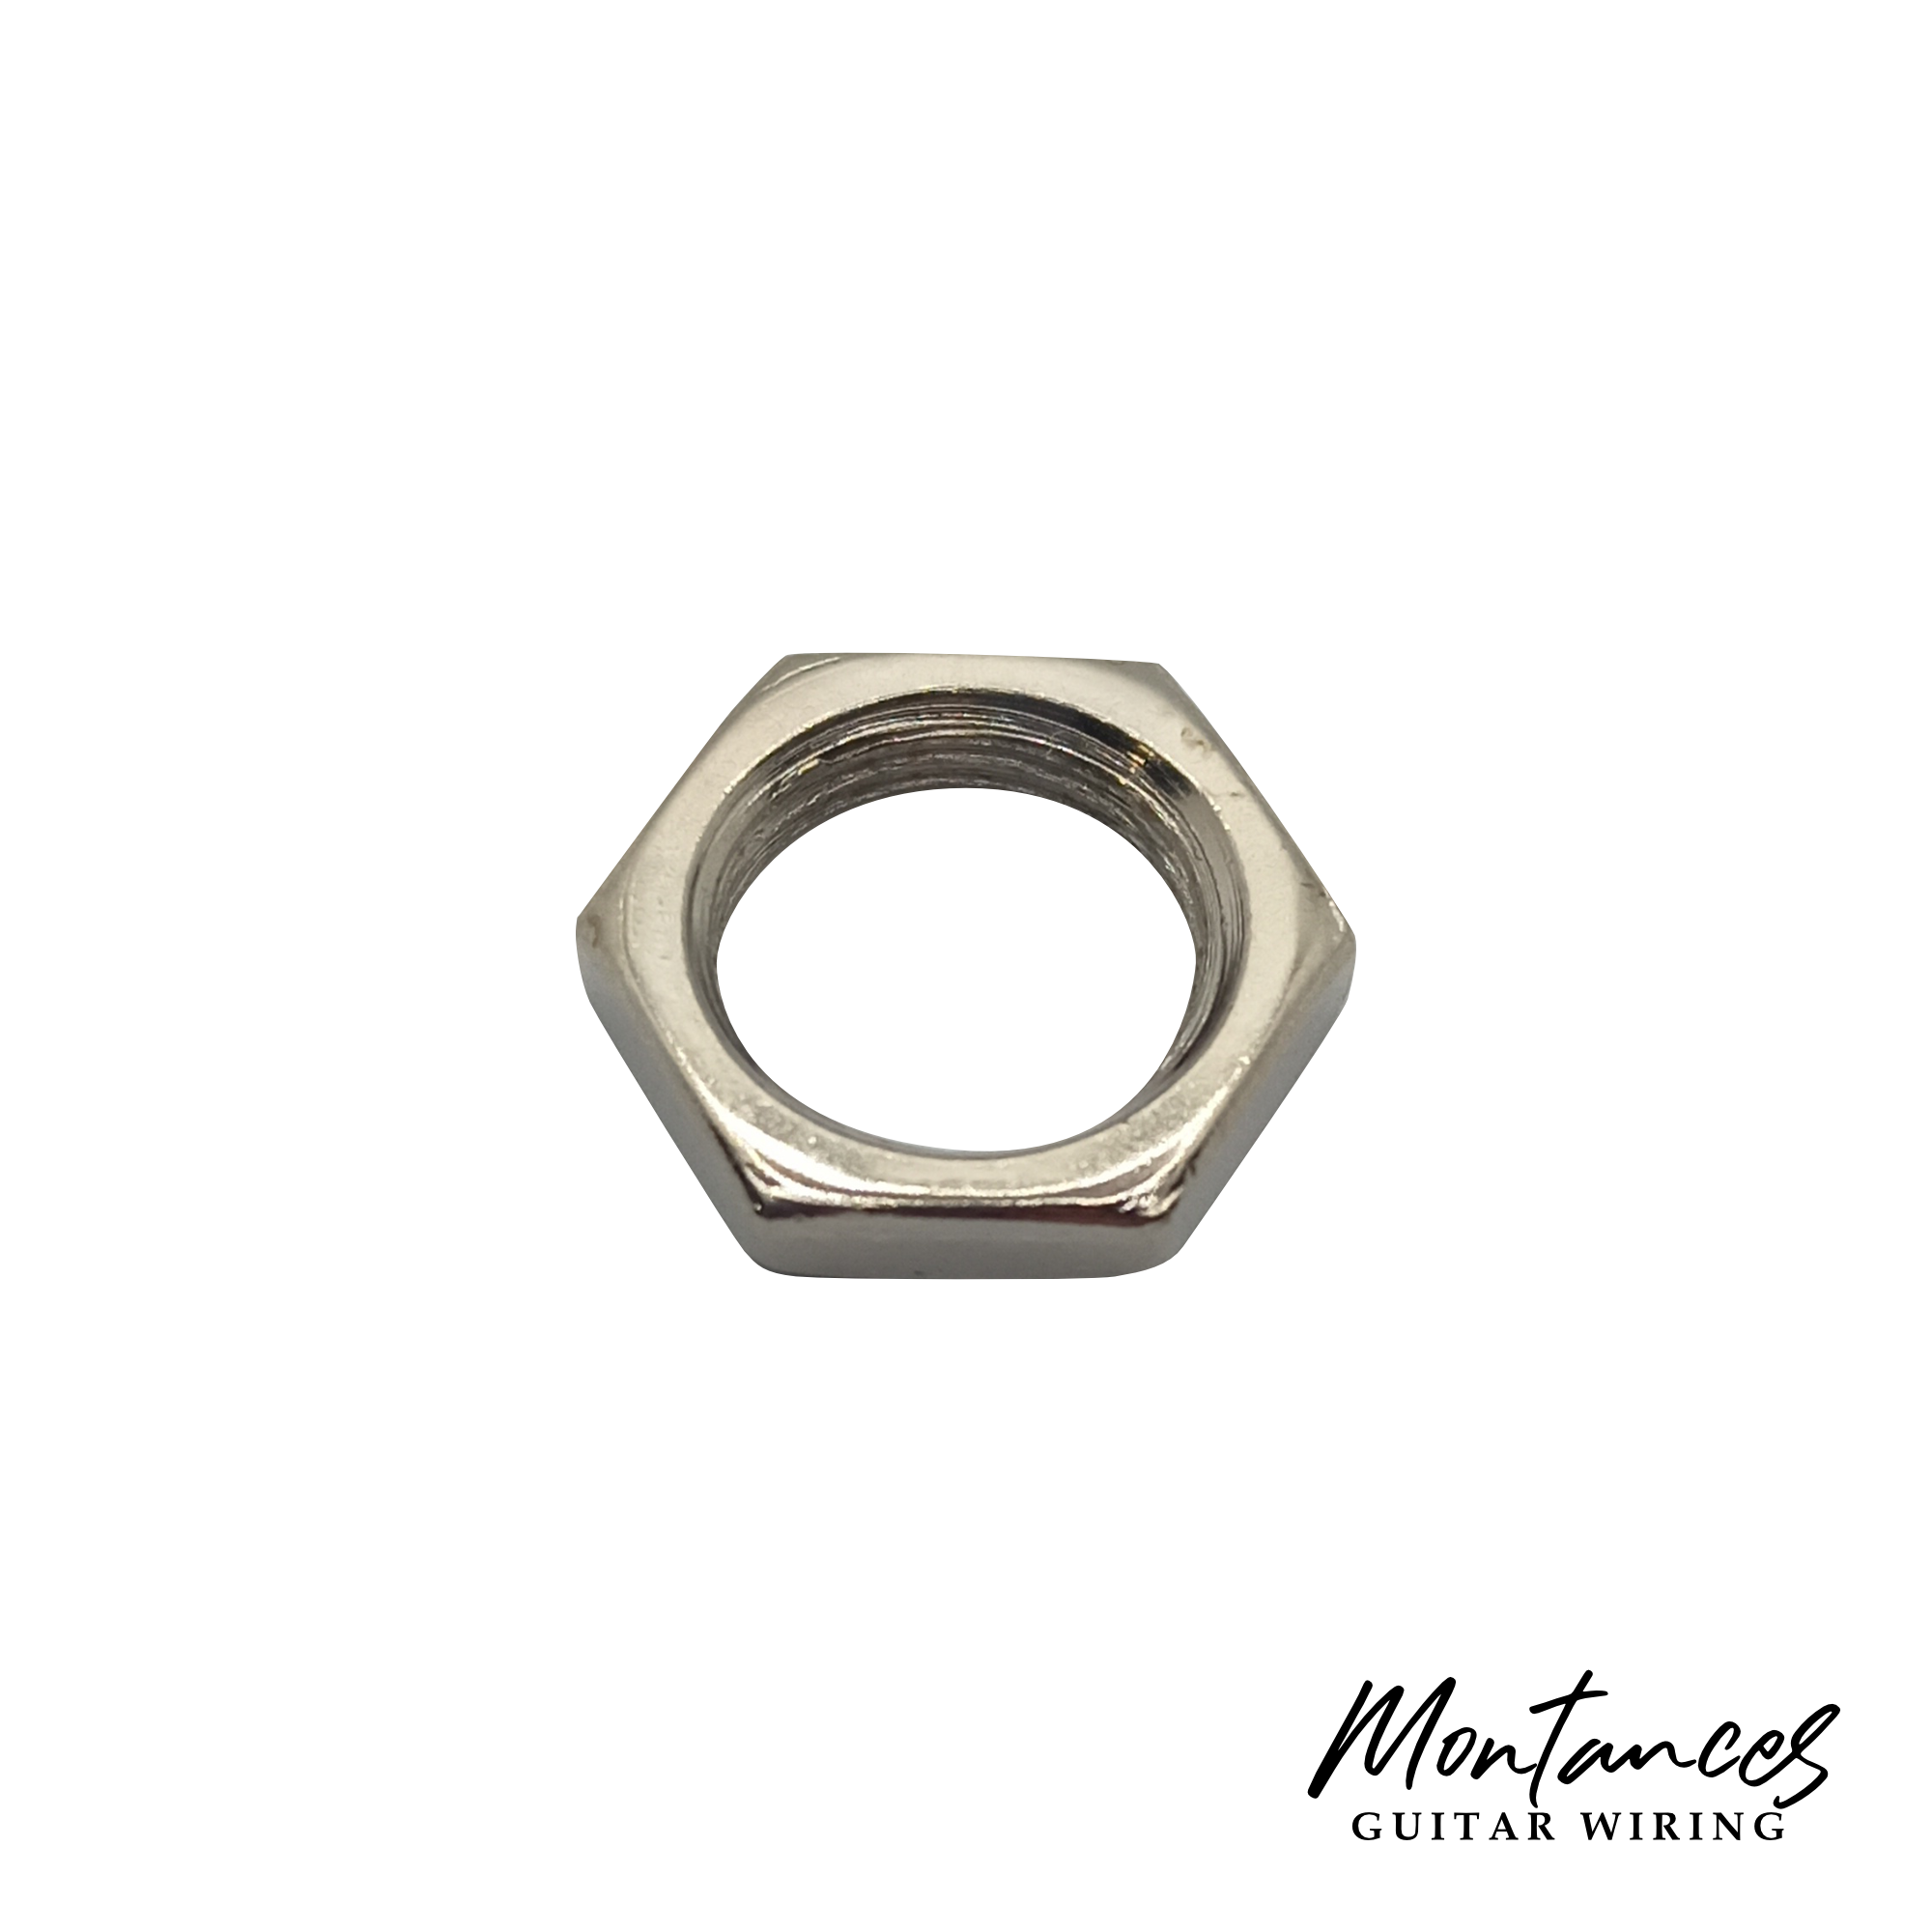 Hex Nut and Washers